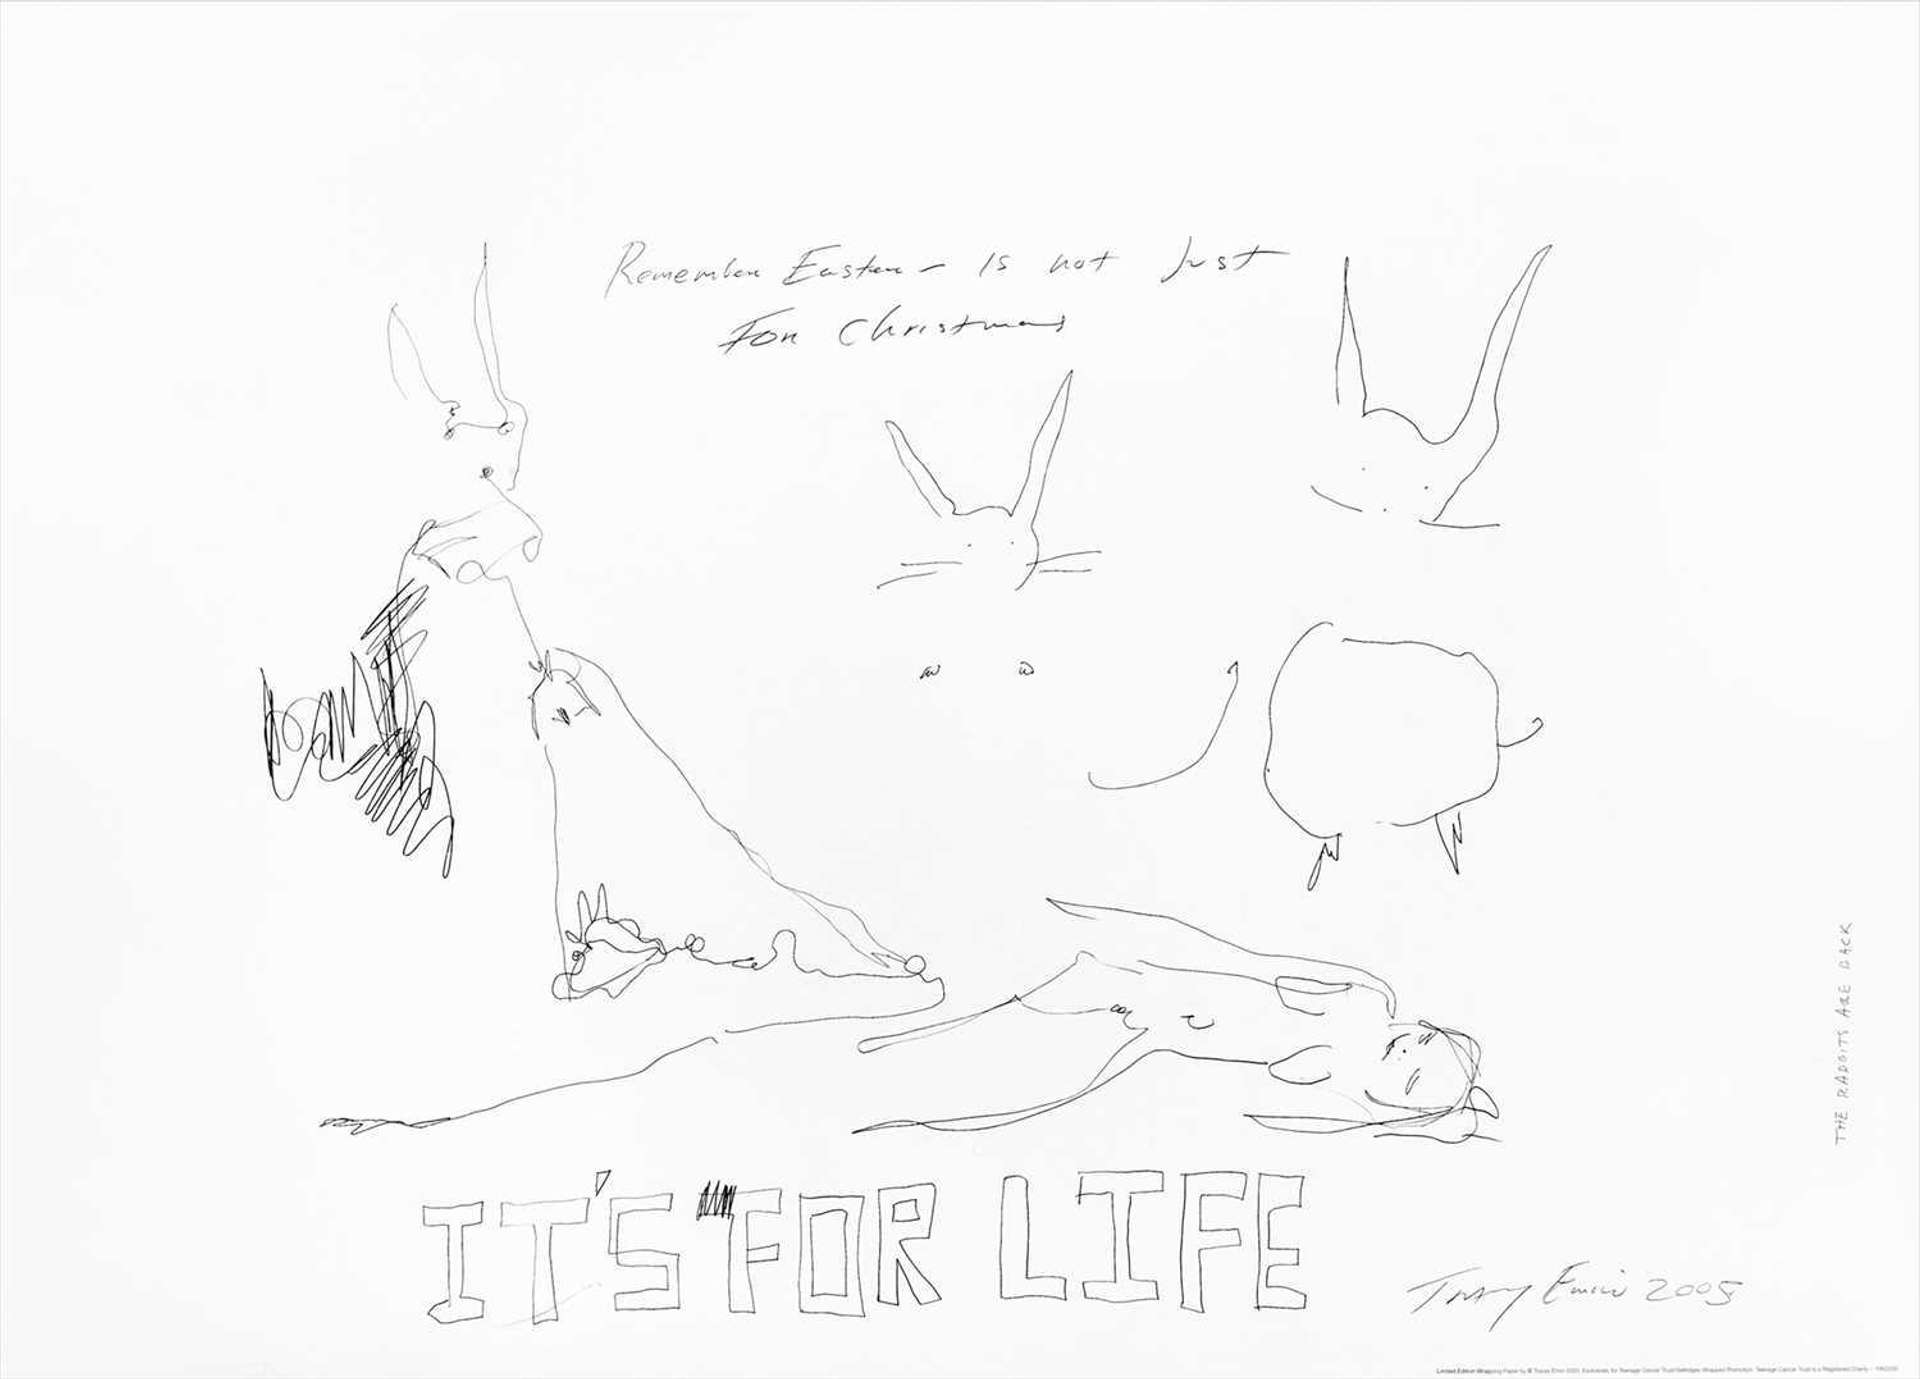 Sketch of a woman’s nude silhouette on the ground surrounded by rabbits